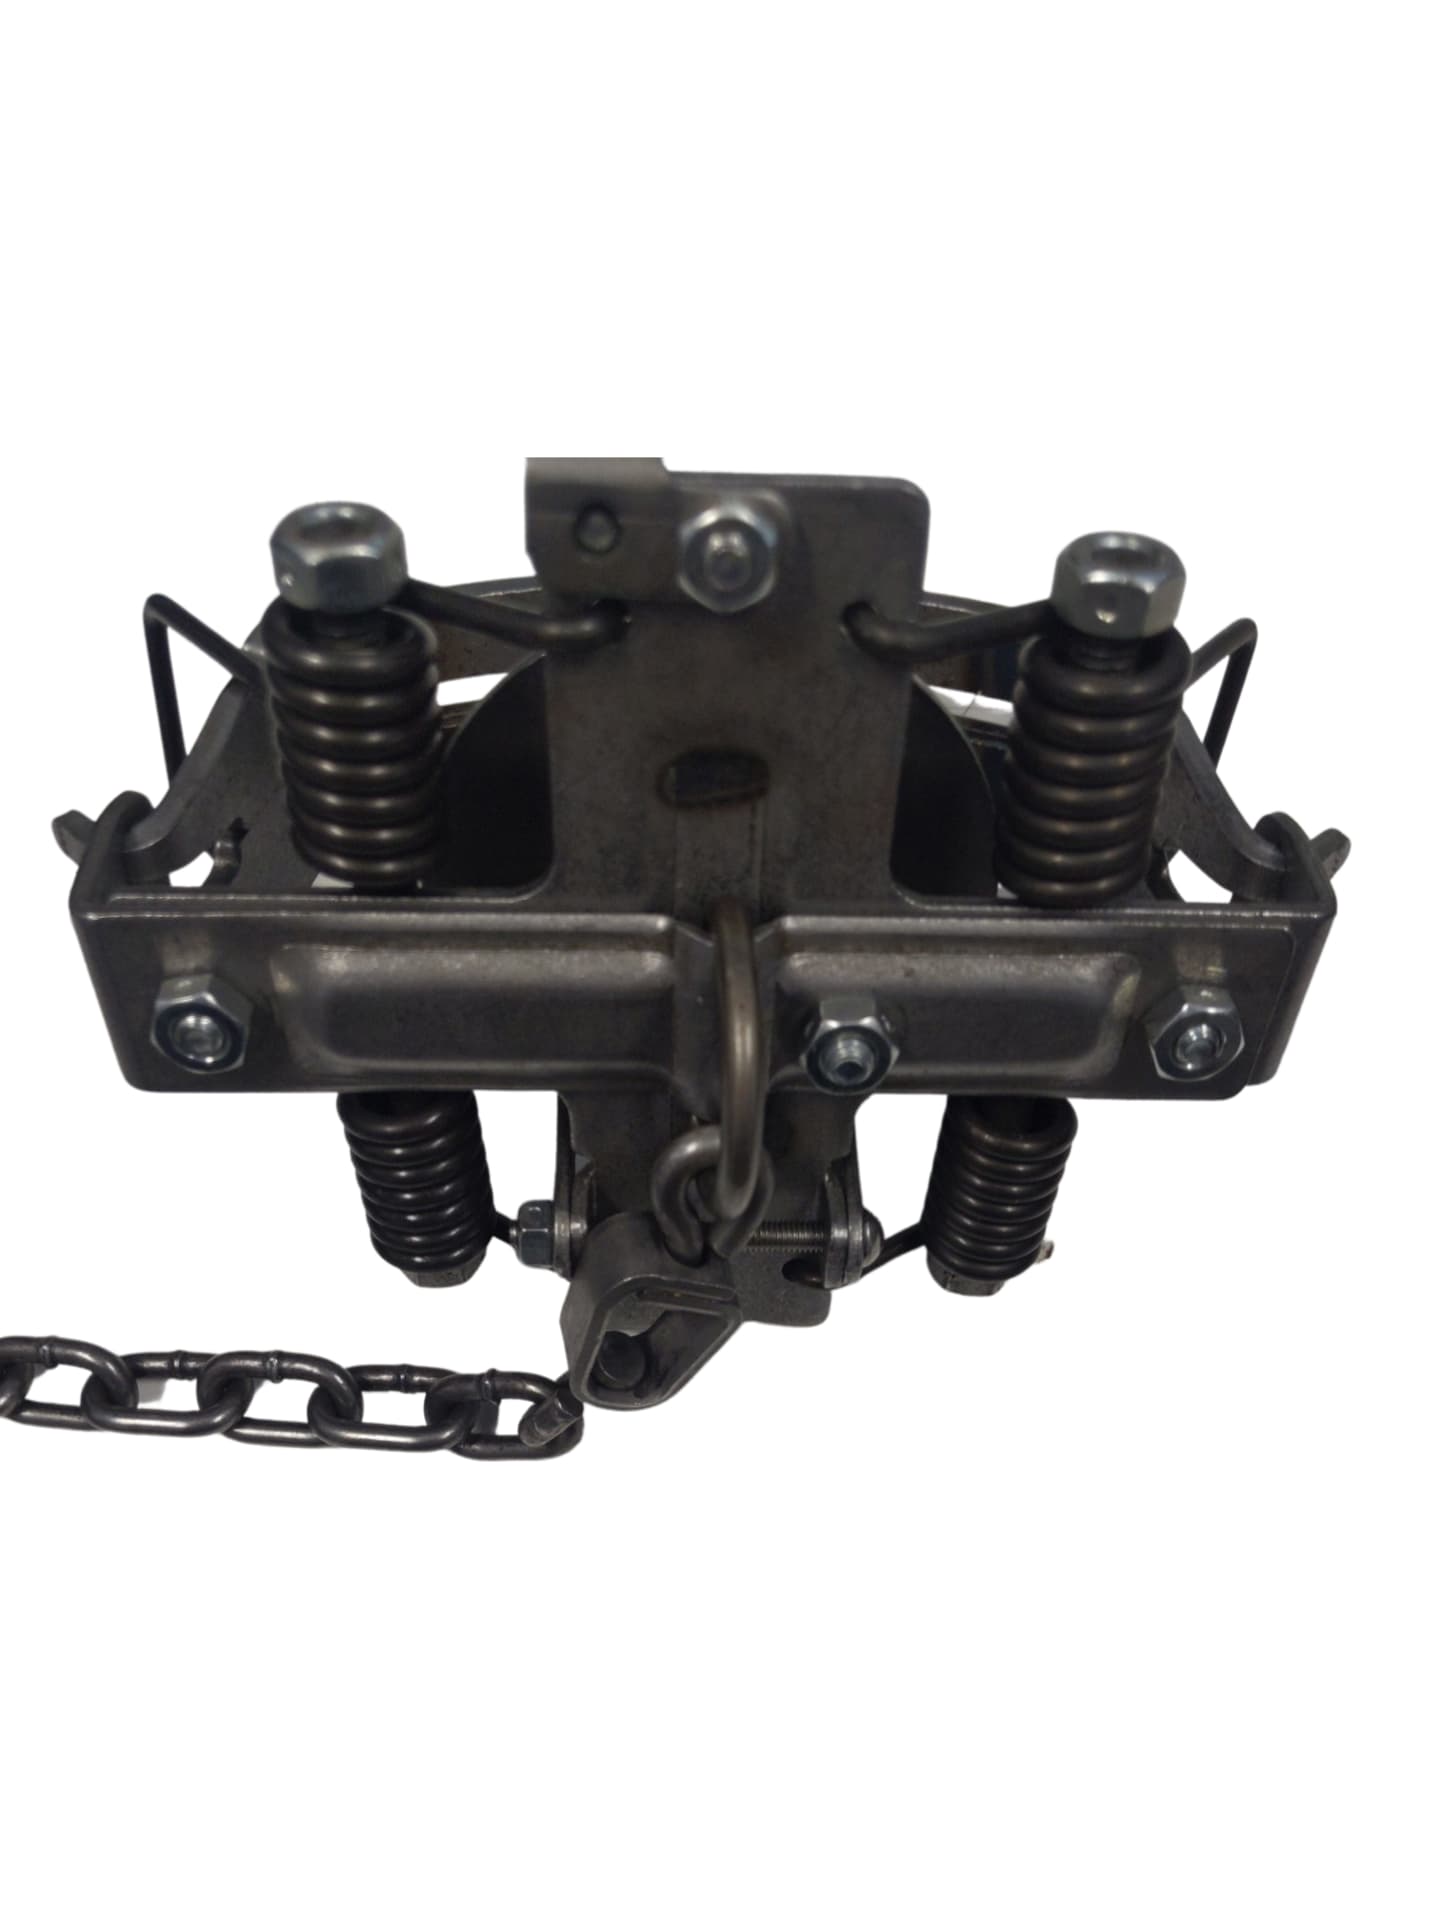 MB650 IL Coil Spring Trap (MB 650)